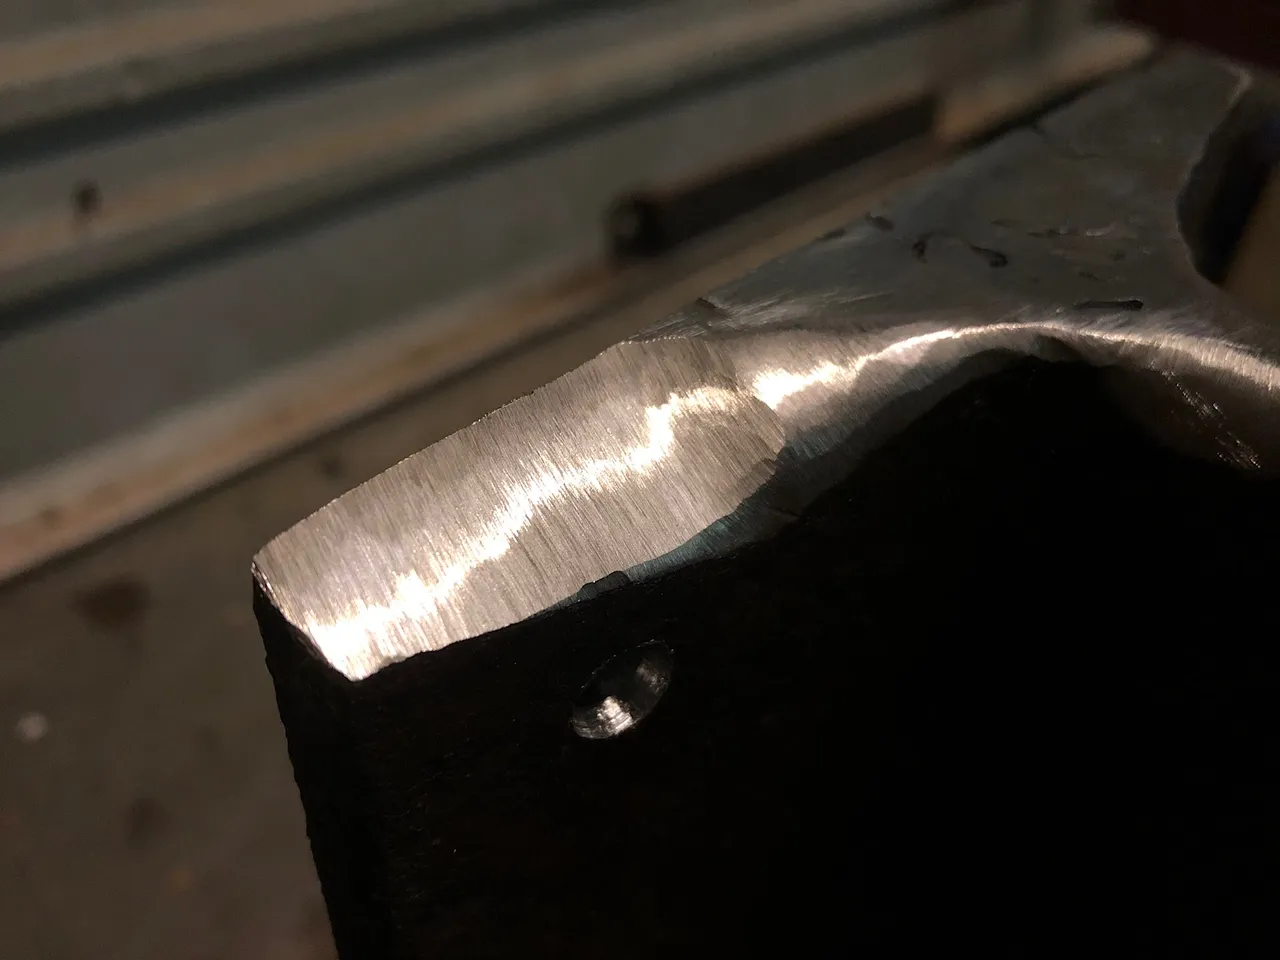 Making a hot cut from the rail base